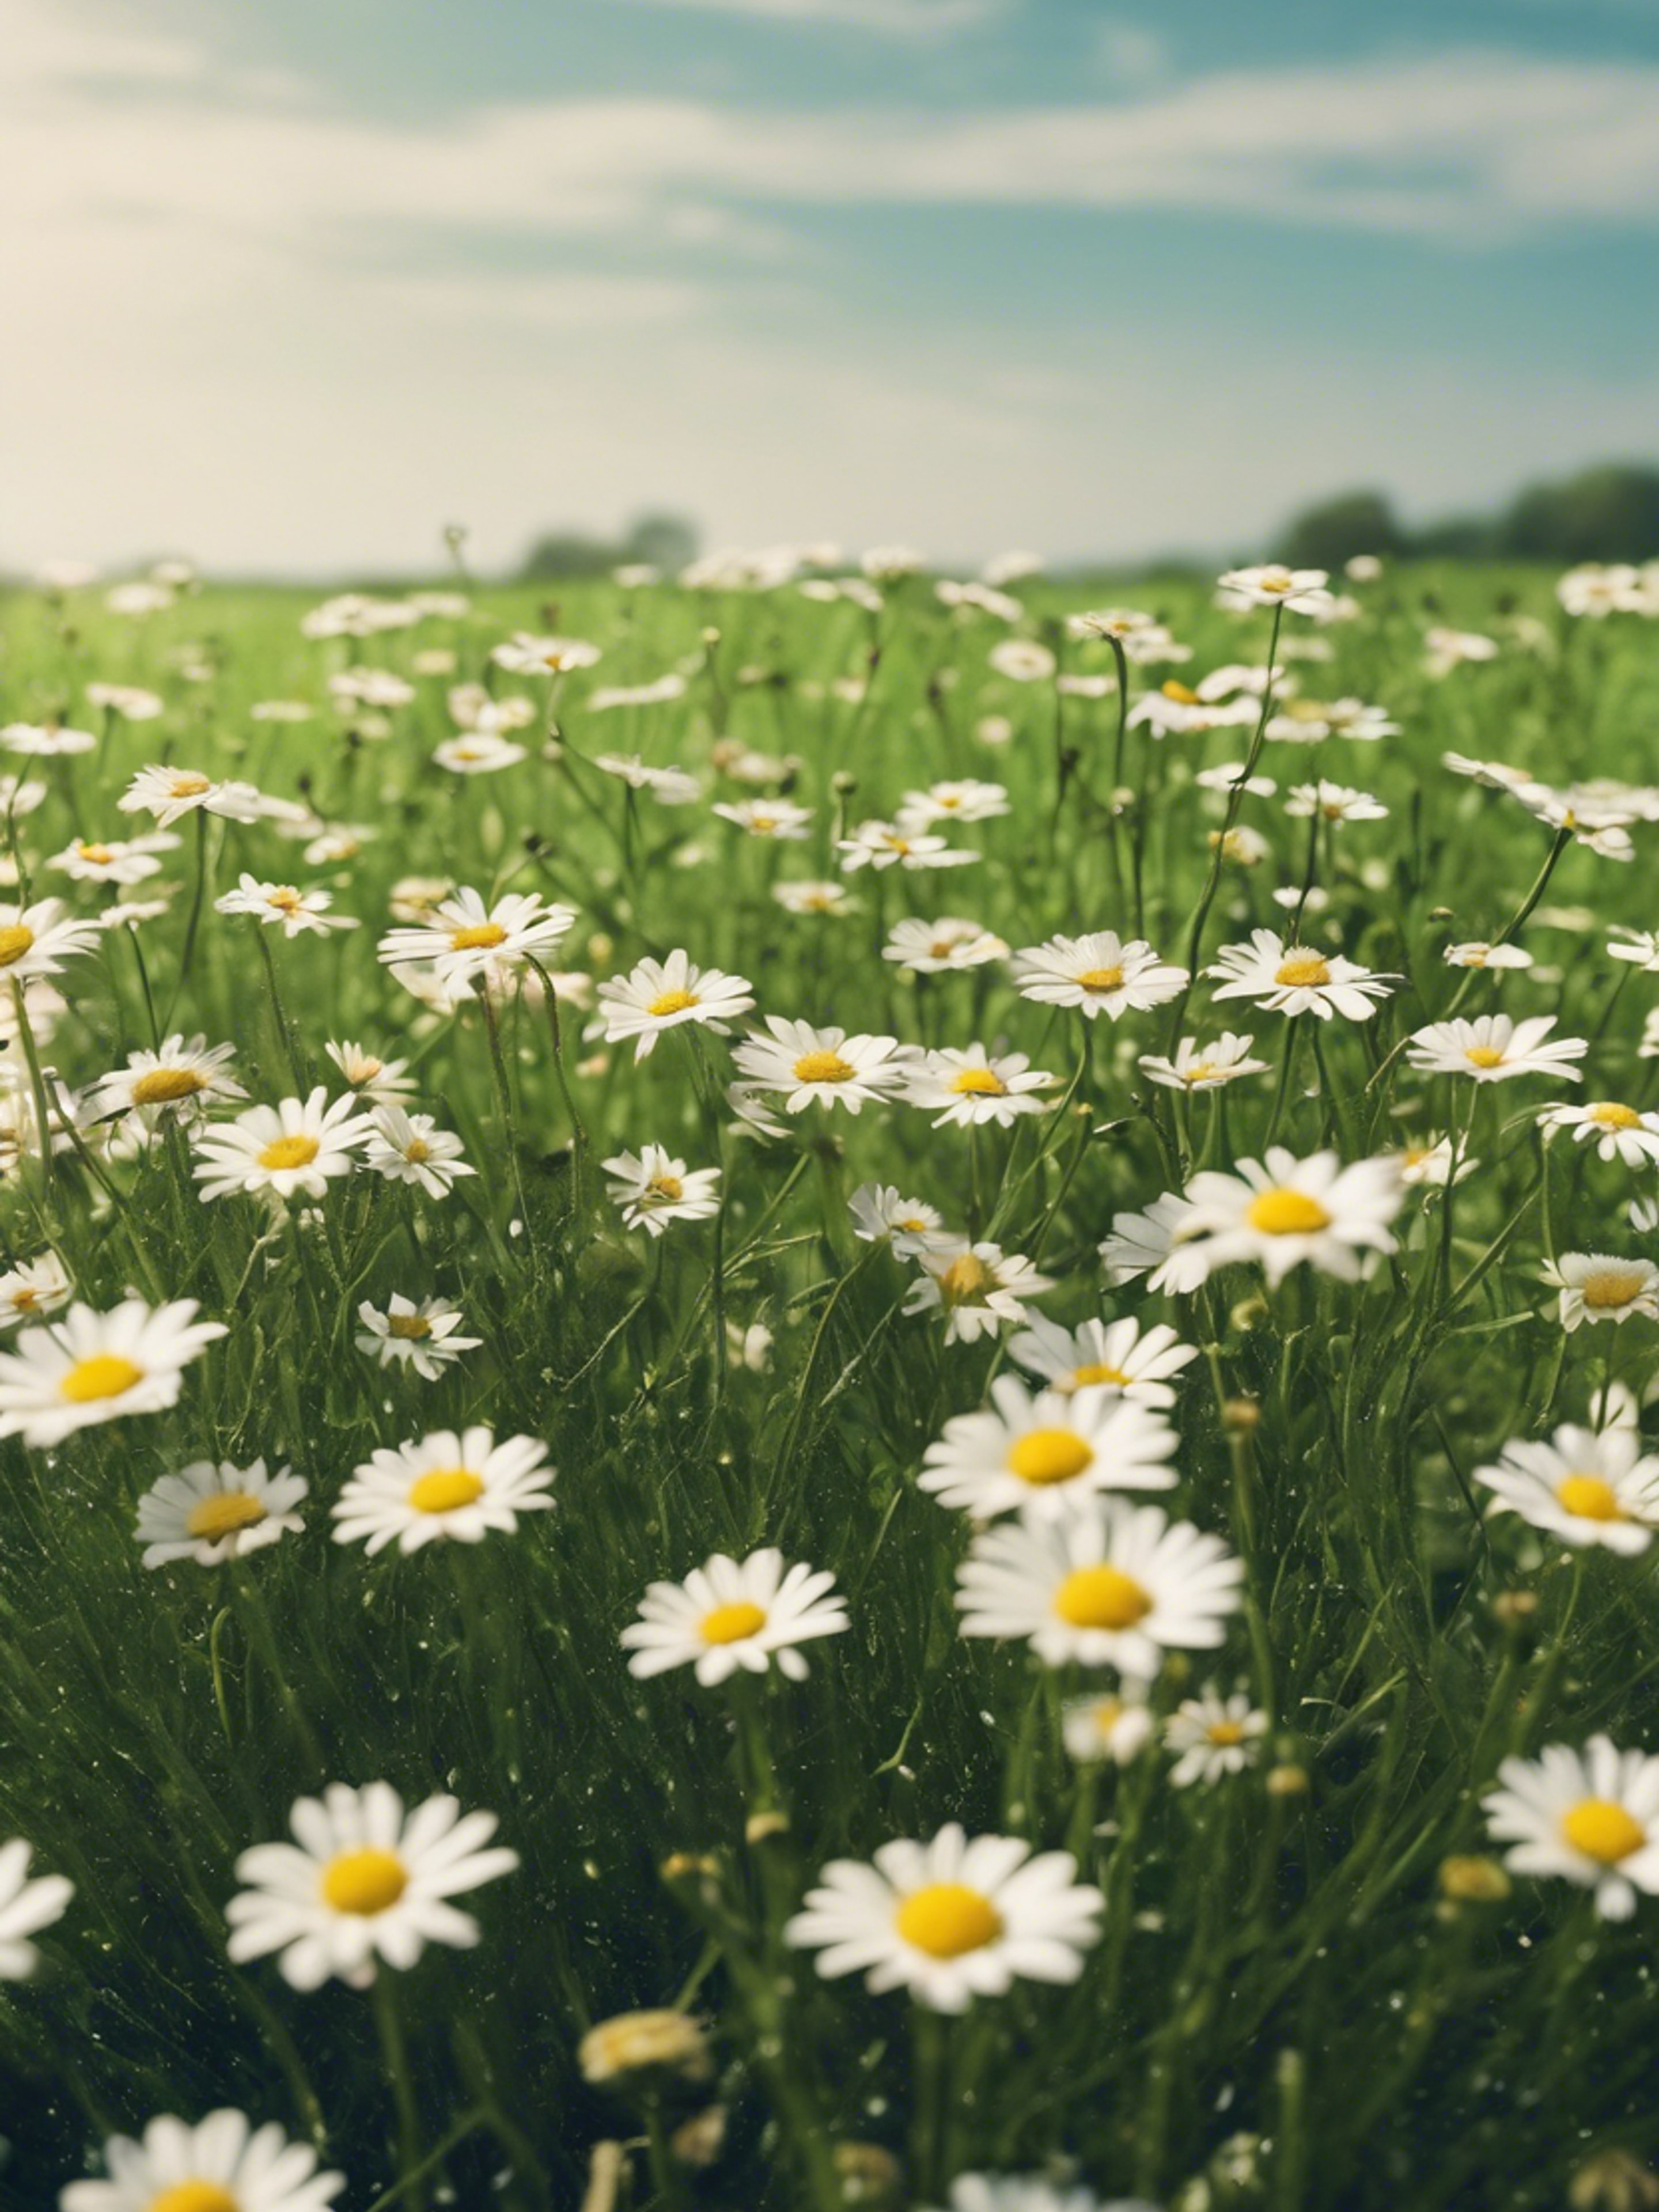 A cool green field sprinkled with daisies under a morning sky. Wallpaper[e270184600e04e908453]